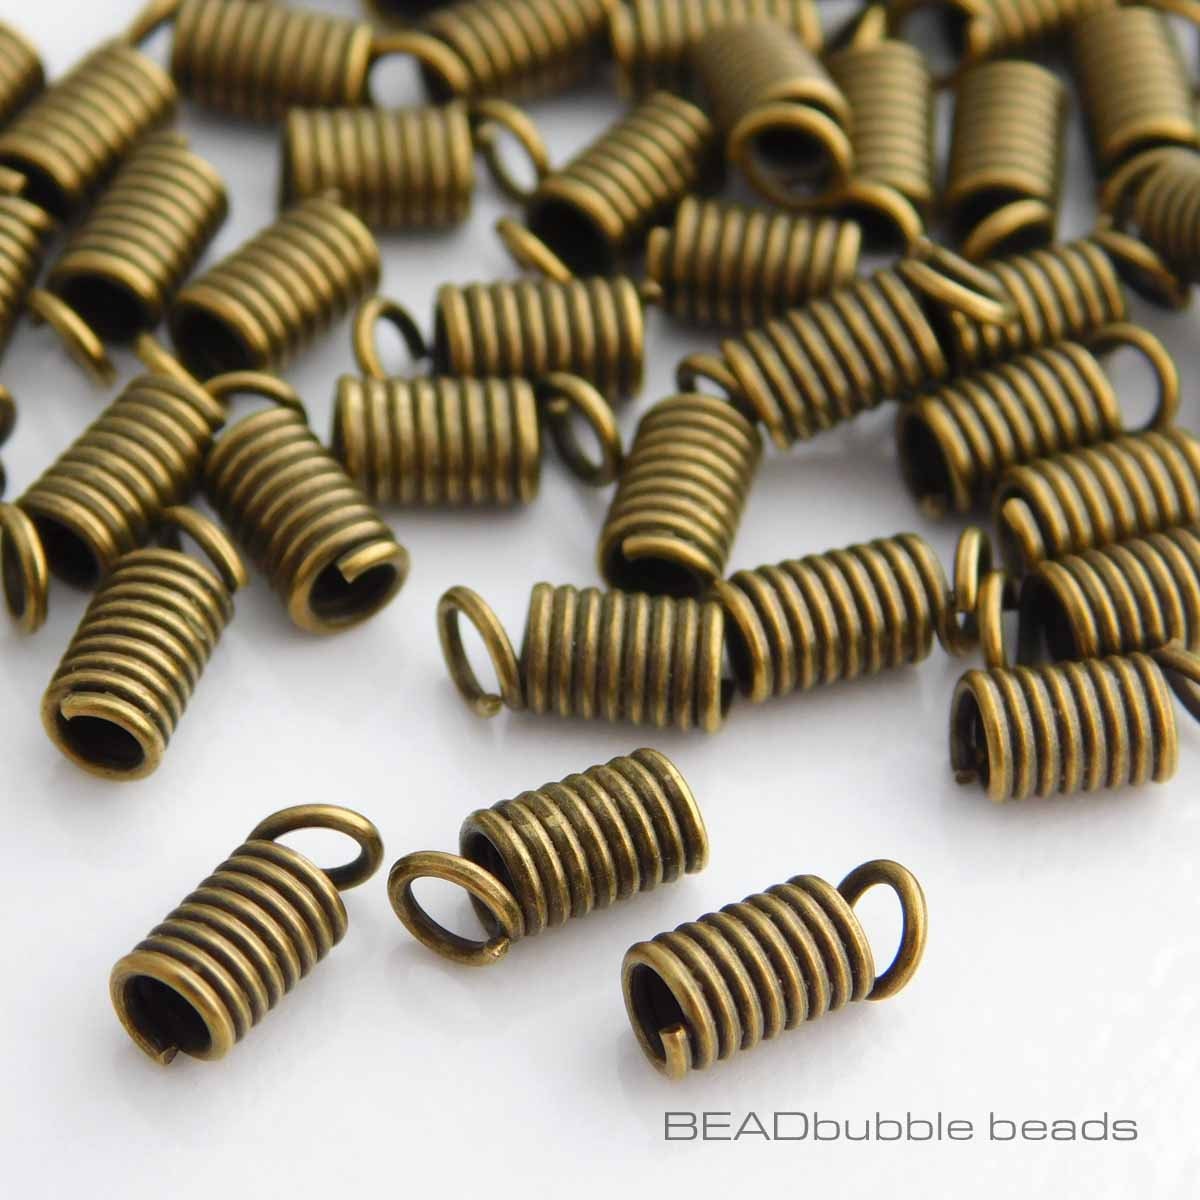 200pcs Metal Alloy Spring Coil Ends Crimp Fasteners Leather Cord Ends Caps for DIY Handmade Ornaments Jewelry Making 9×5mm Hole 3.5mm Coil Cord Ends 